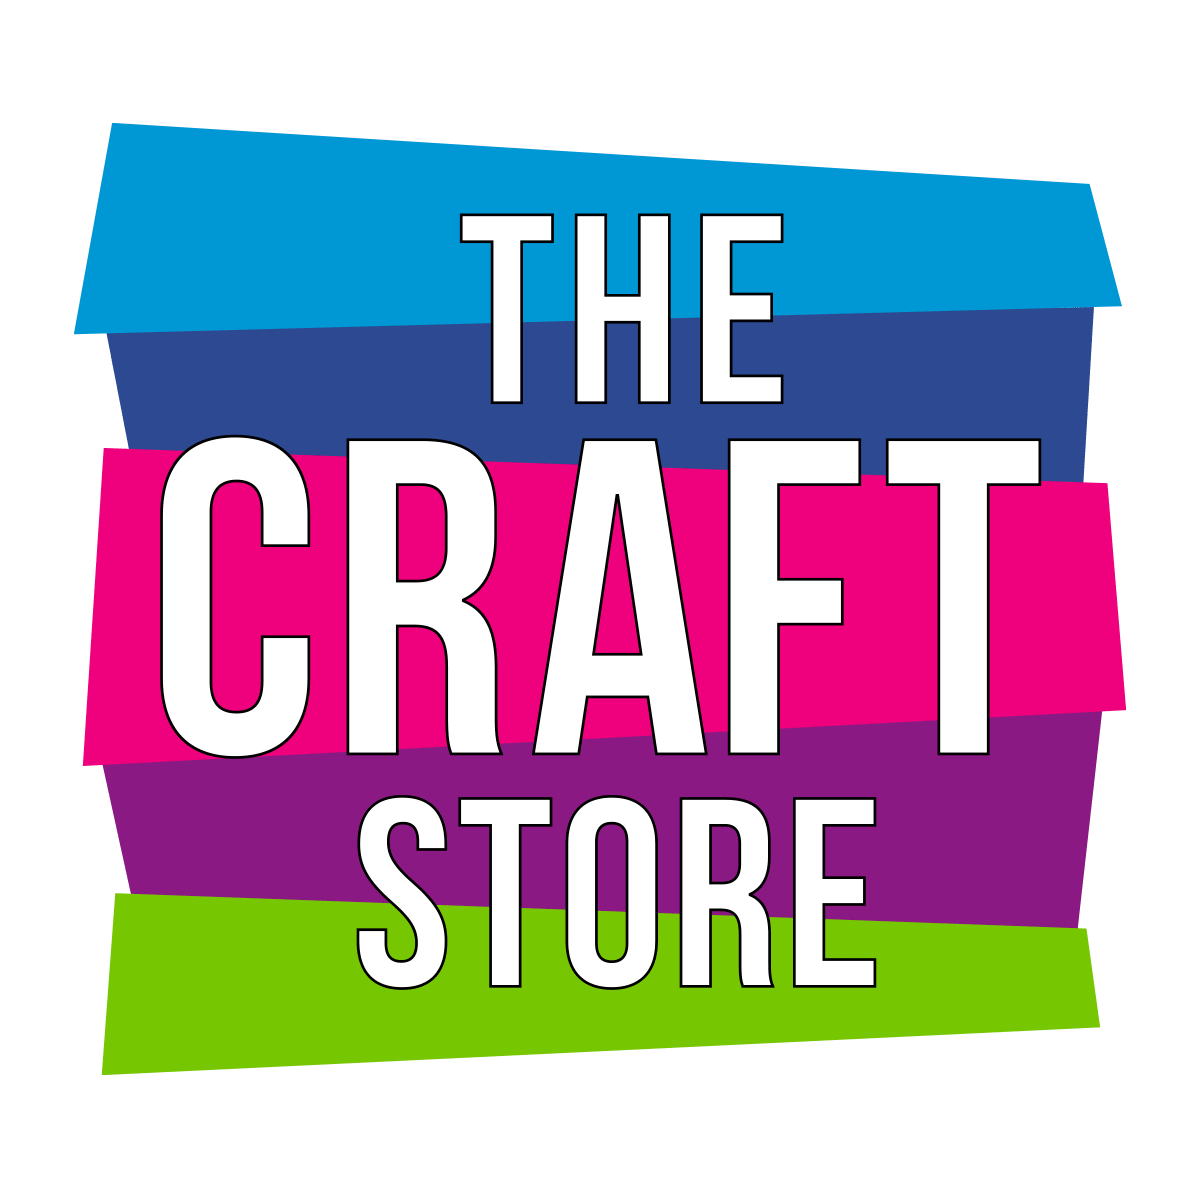 The Craft Store logo and information